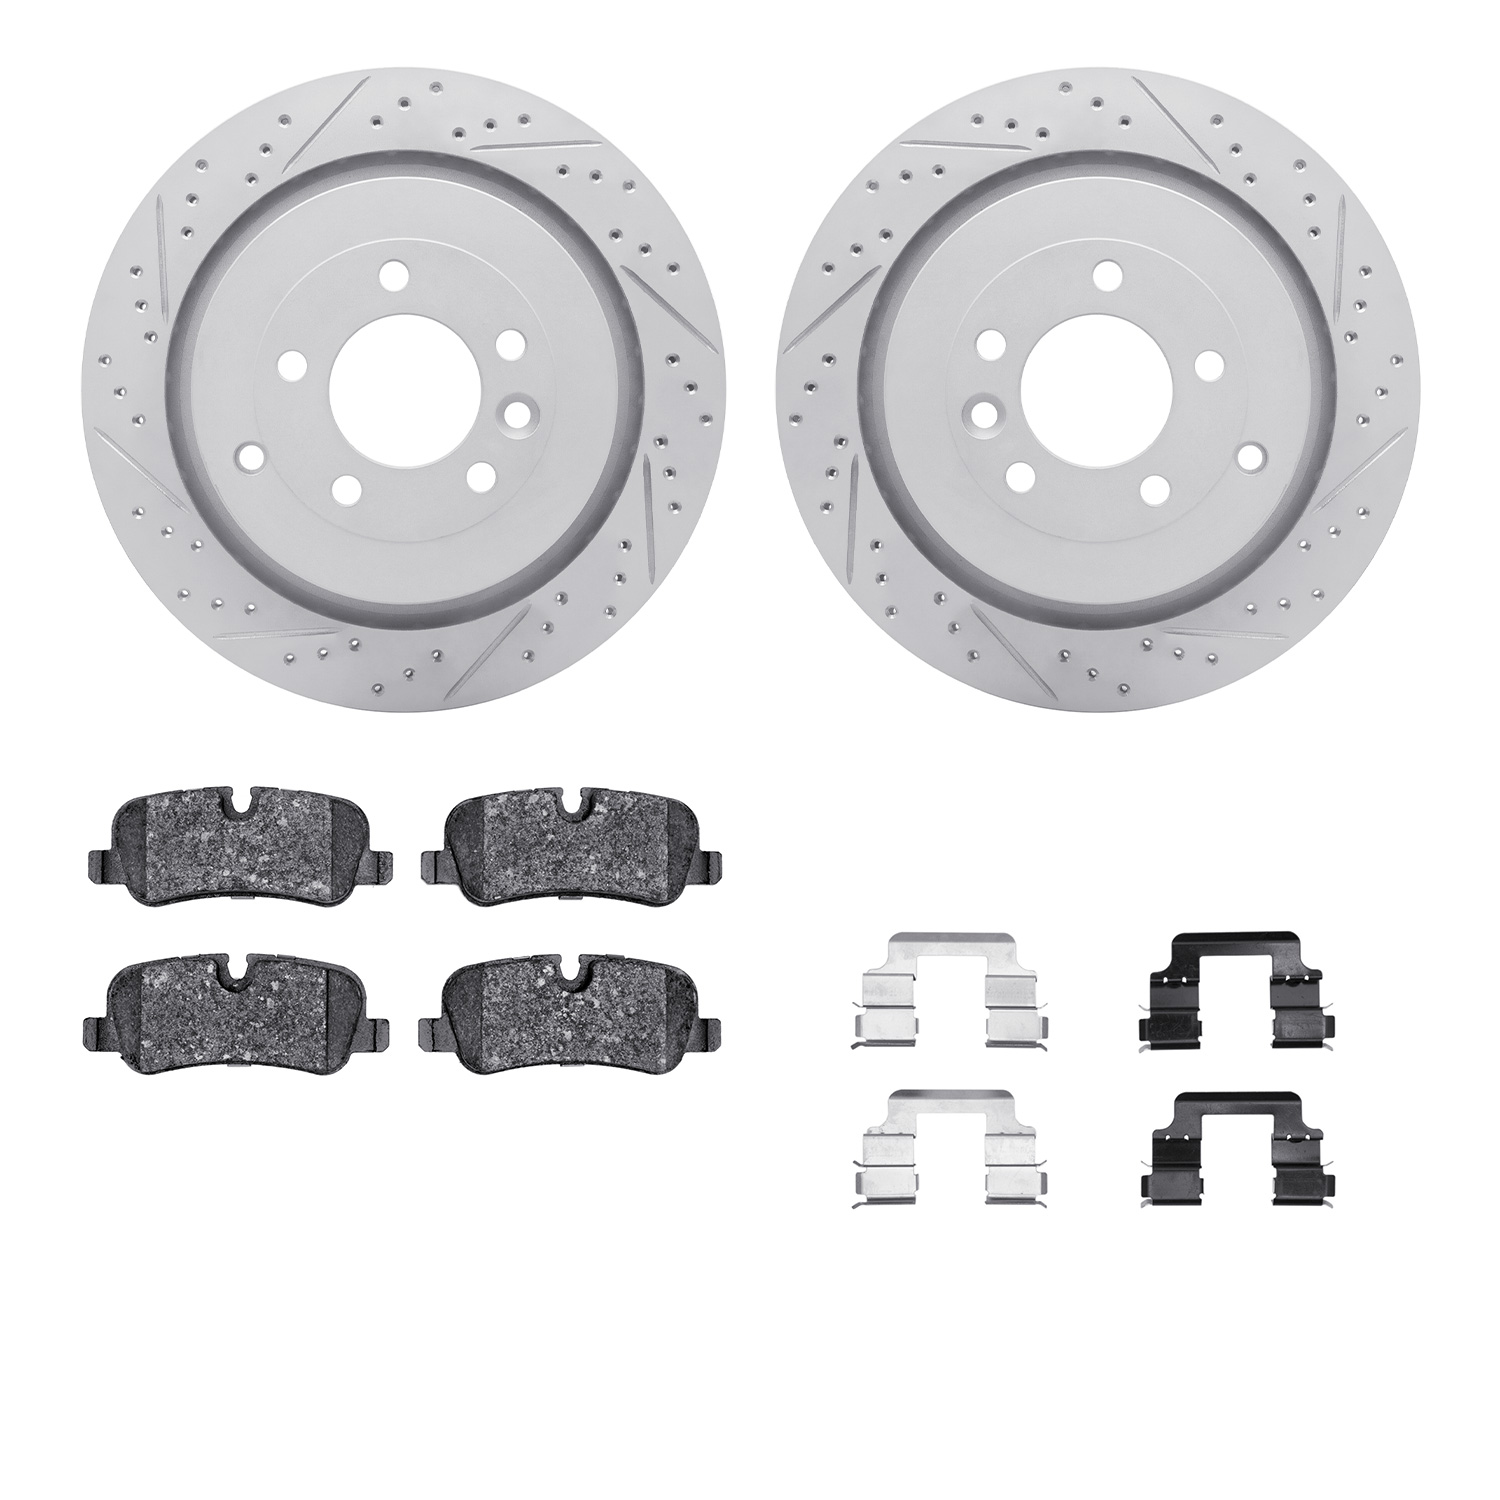 2512-11015 Geoperformance Drilled/Slotted Rotors w/5000 Advanced Brake Pads Kit & Hardware, 2005-2016 Land Rover, Position: Rear